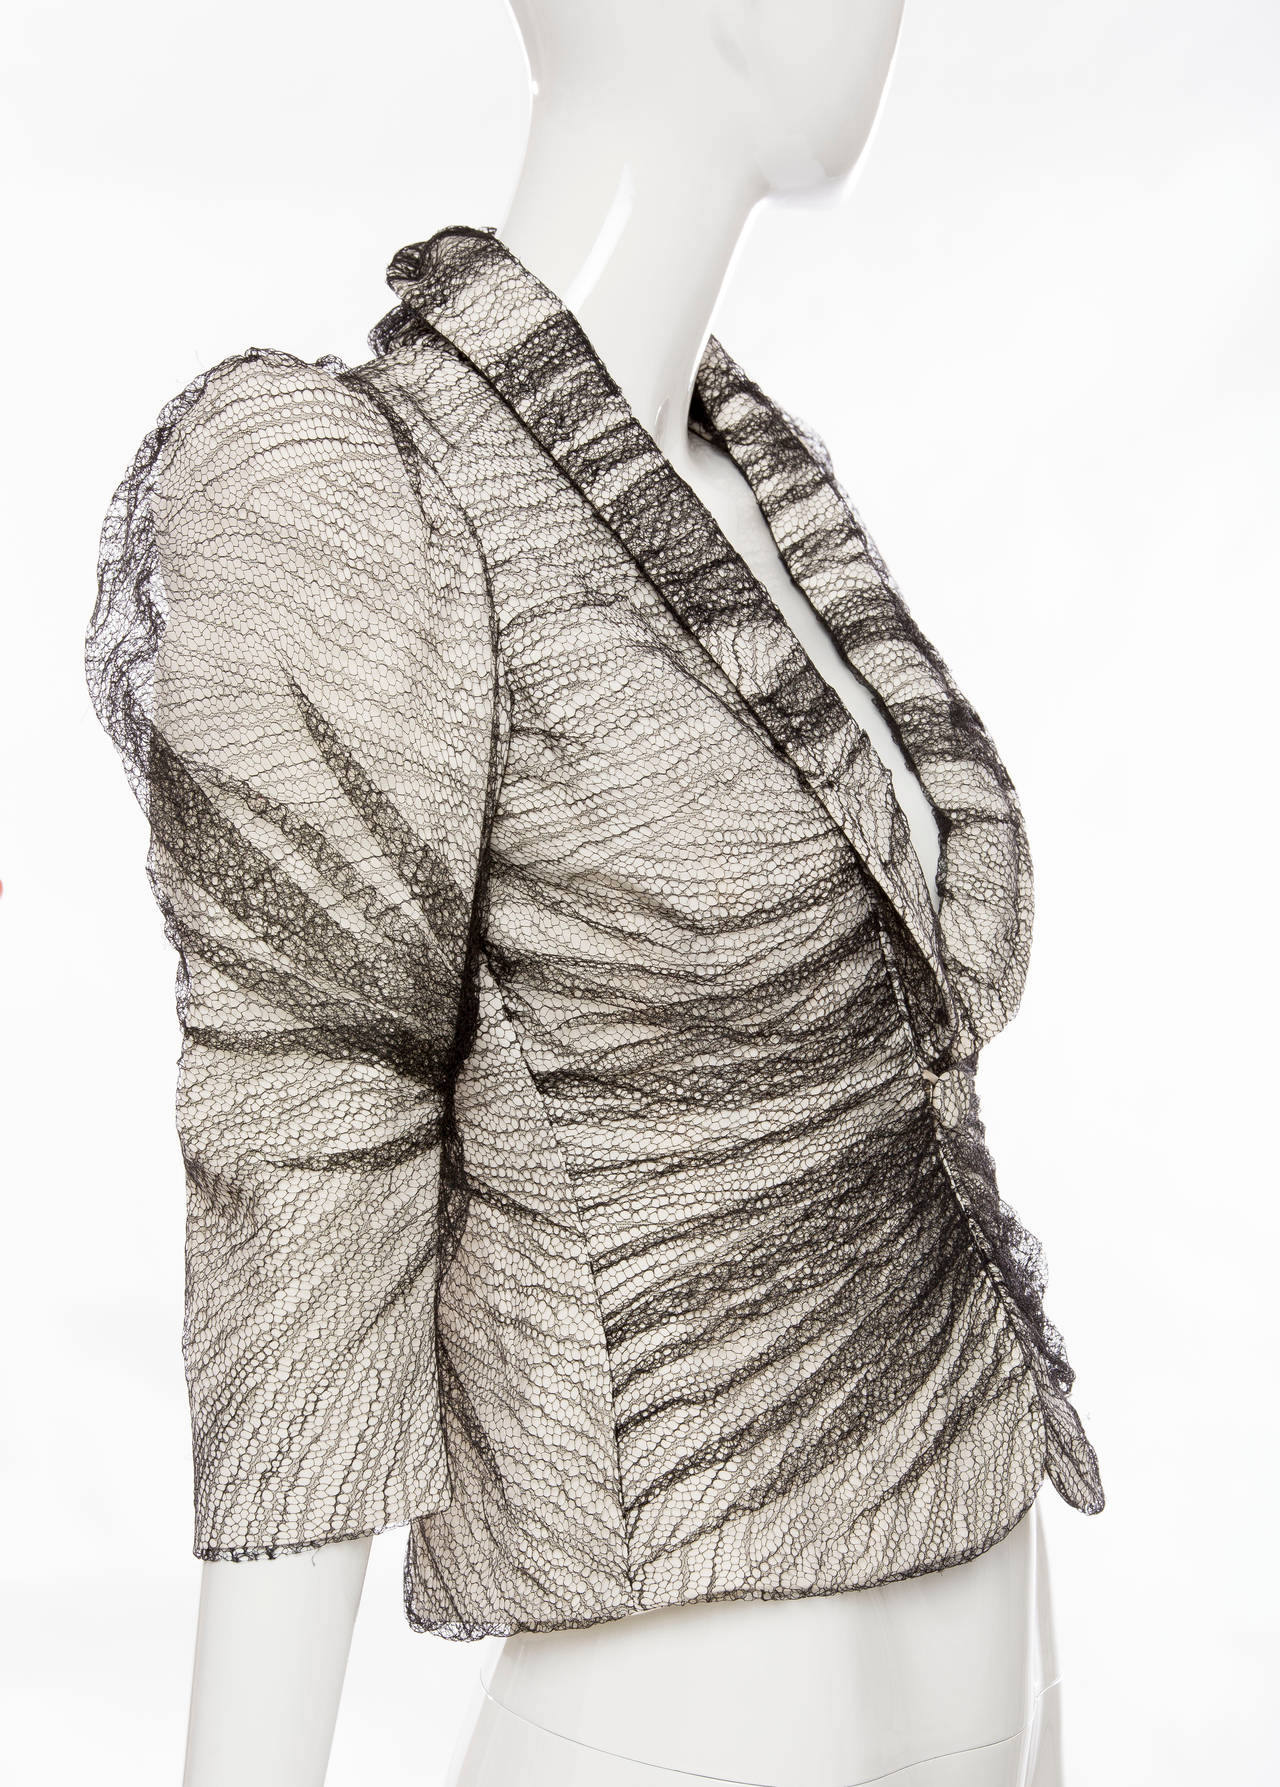 Alexander McQueen, Spring-Summer 2007, Sarabande collection tulle overlay button front jacket and fully lined.

